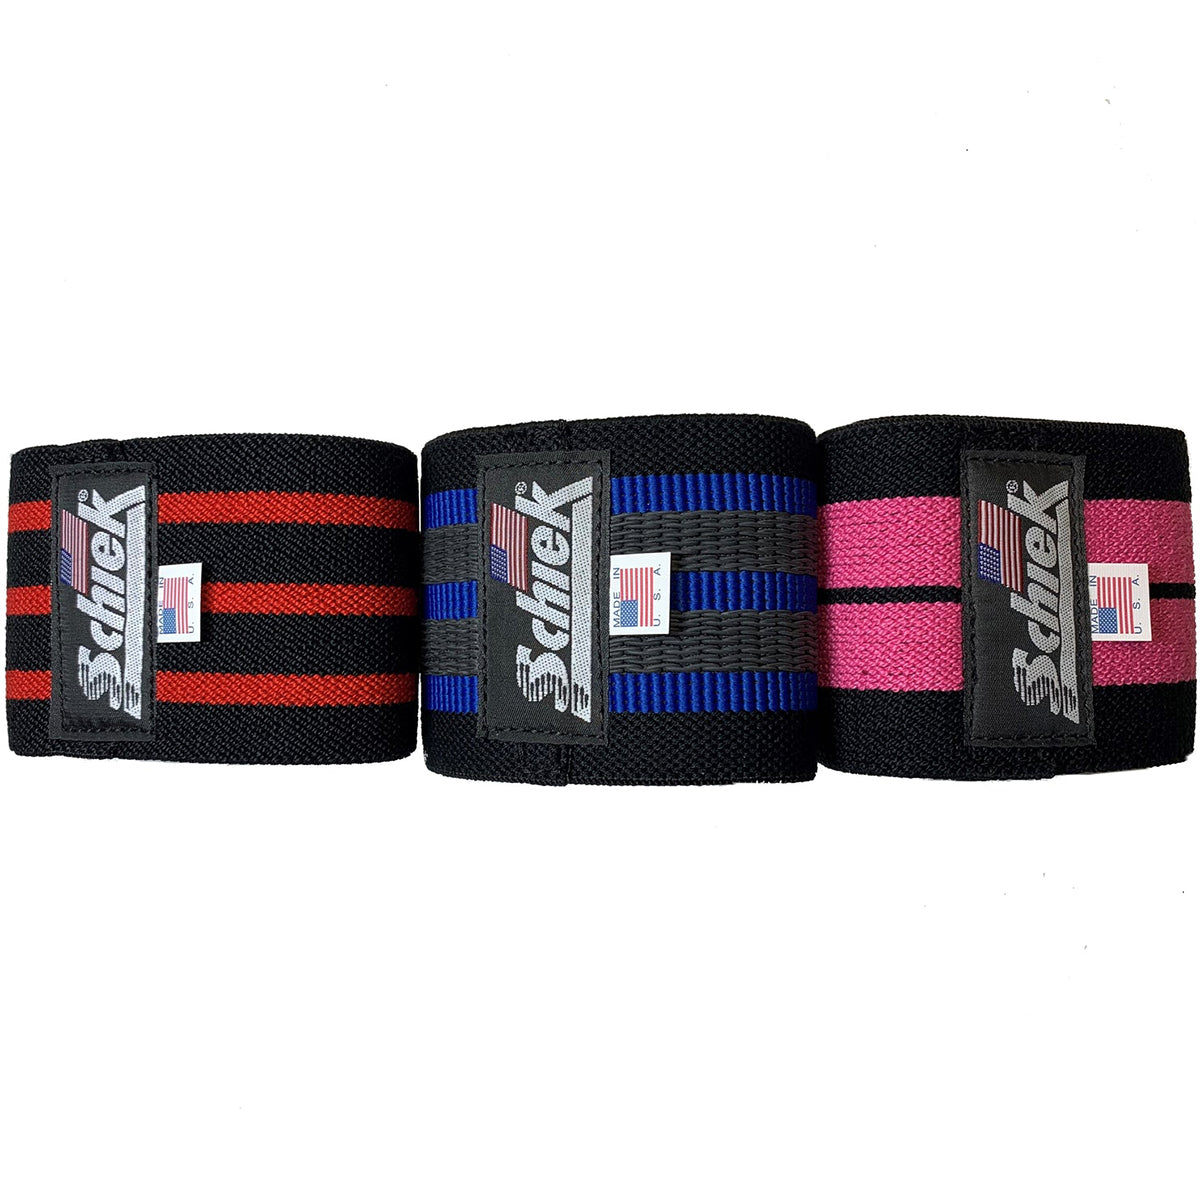 Schiek Sports Model 1180HB Fitness and Exercise Hip Band Schiek Sports